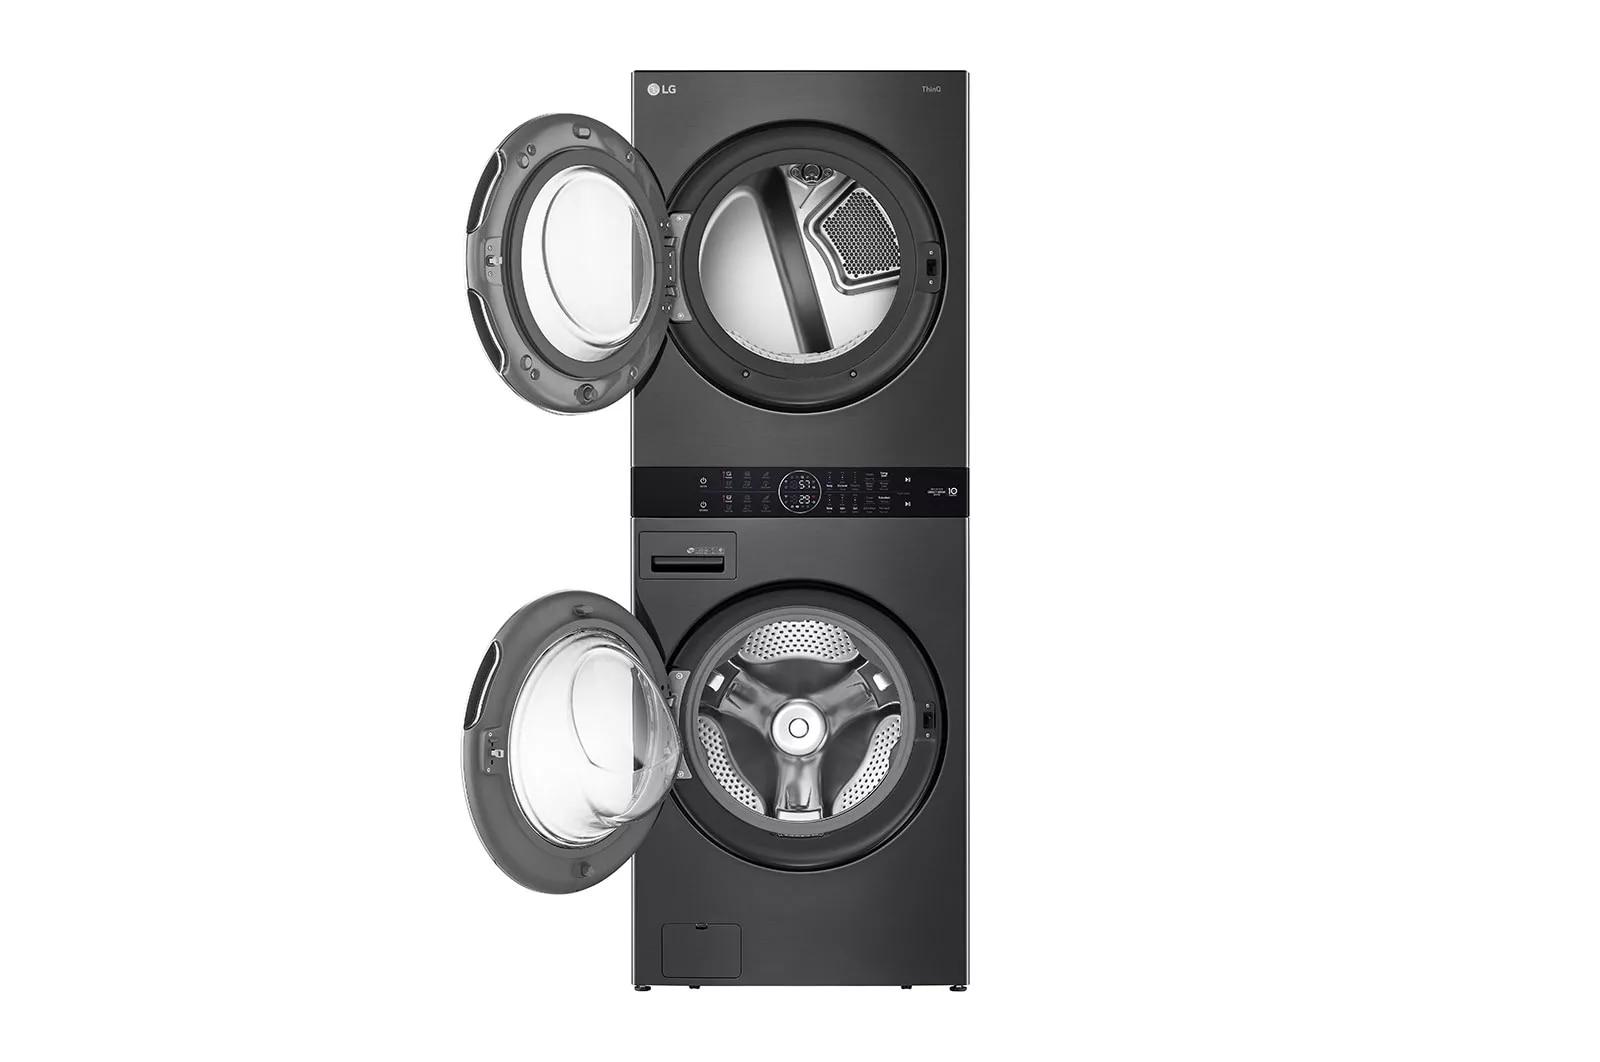 LG Electric Washer Tower - image 4 of 5